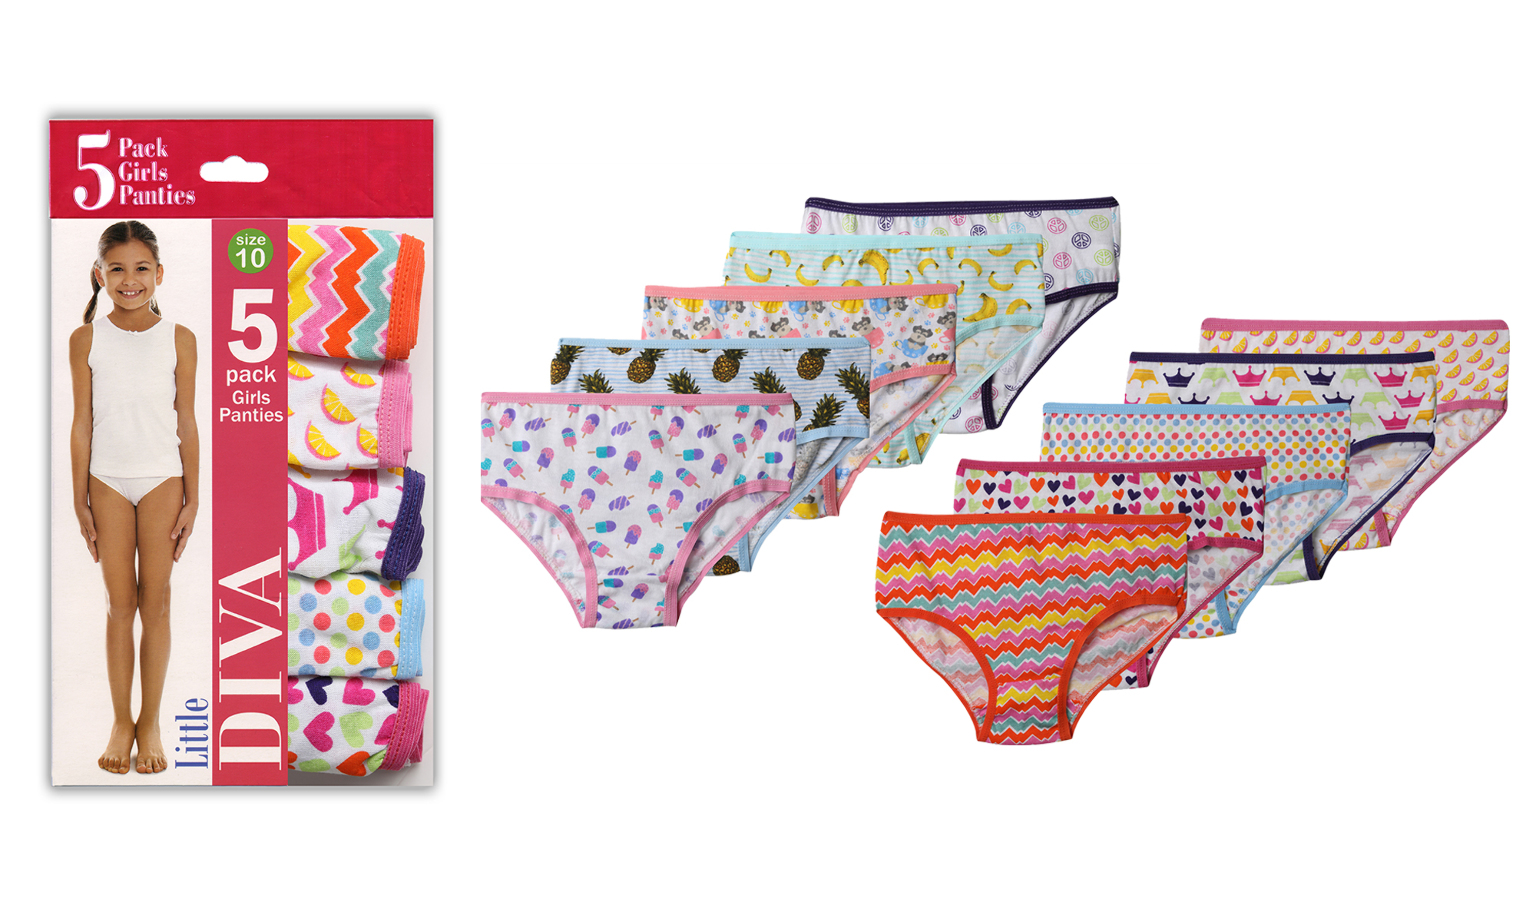 Girl's Panties - Assorted Prints, Size 12, 5 Pack